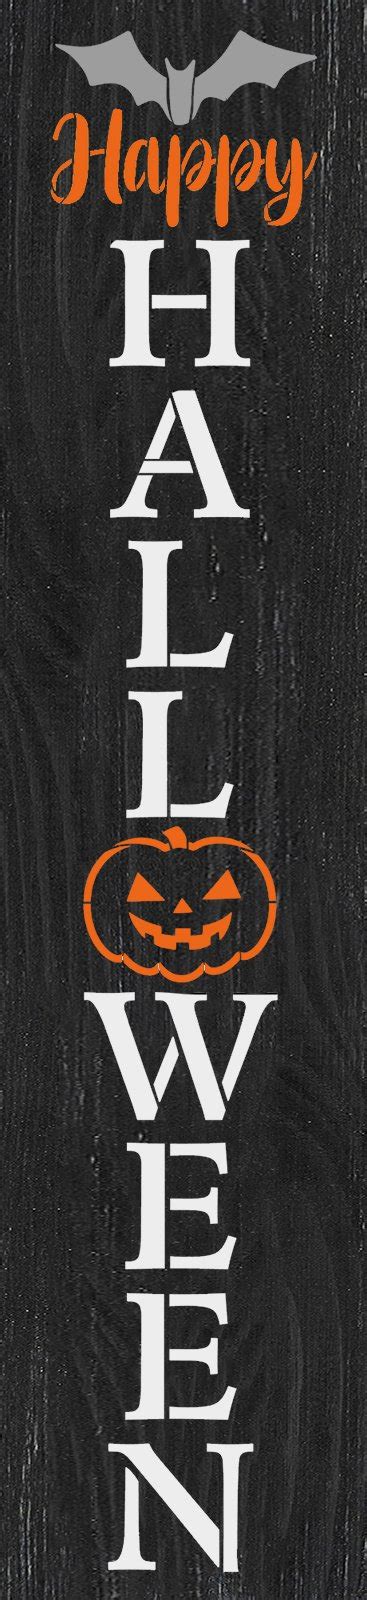 Vertical Happy Halloween Tall Porch Sign Stencil By Studior12 4 Ft